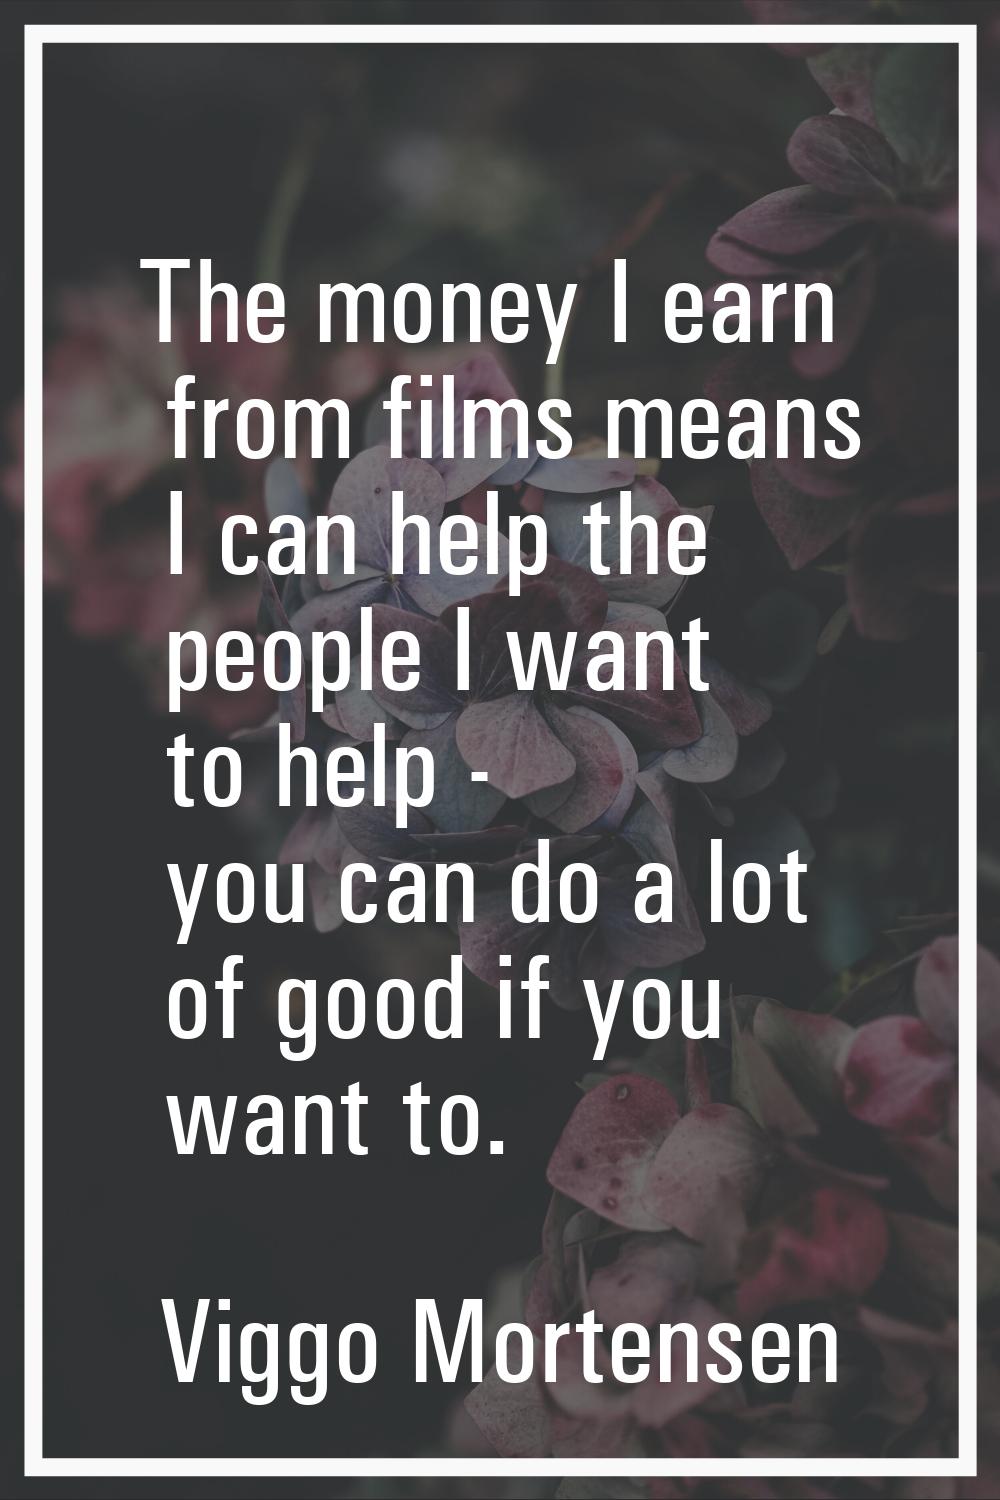 The money I earn from films means I can help the people I want to help - you can do a lot of good i